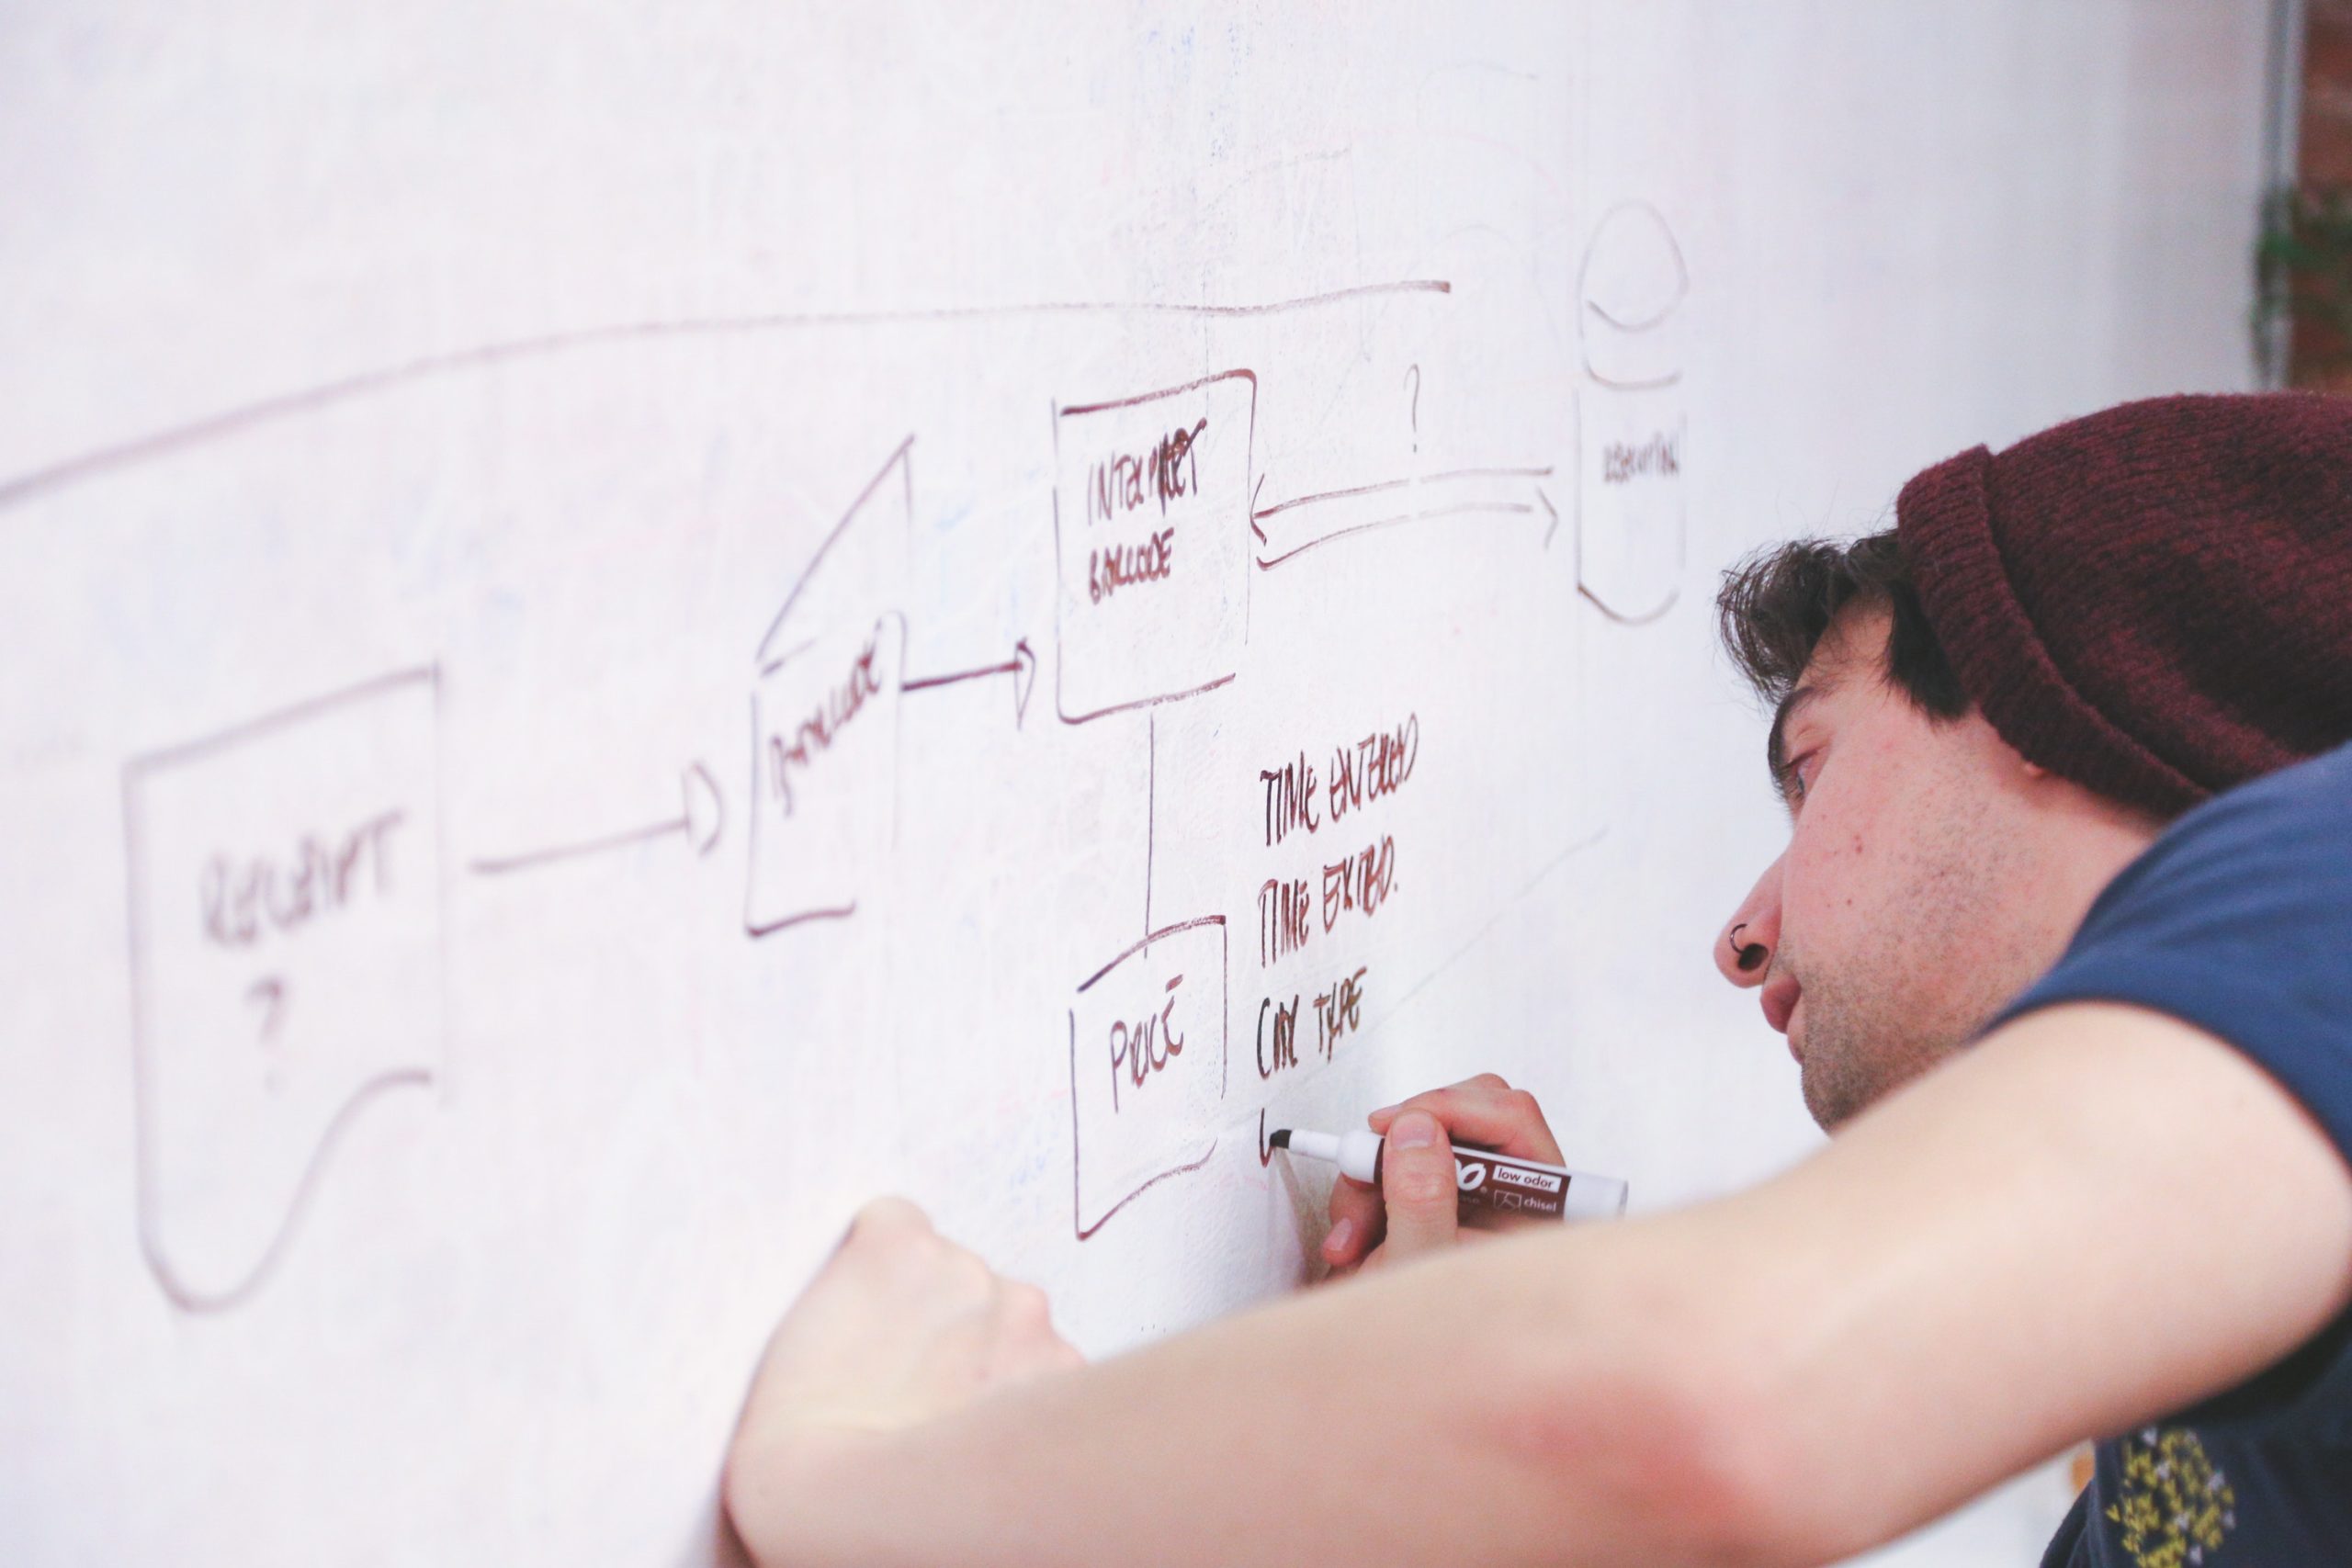 a person drawing an agile flowchart on a whiteboard